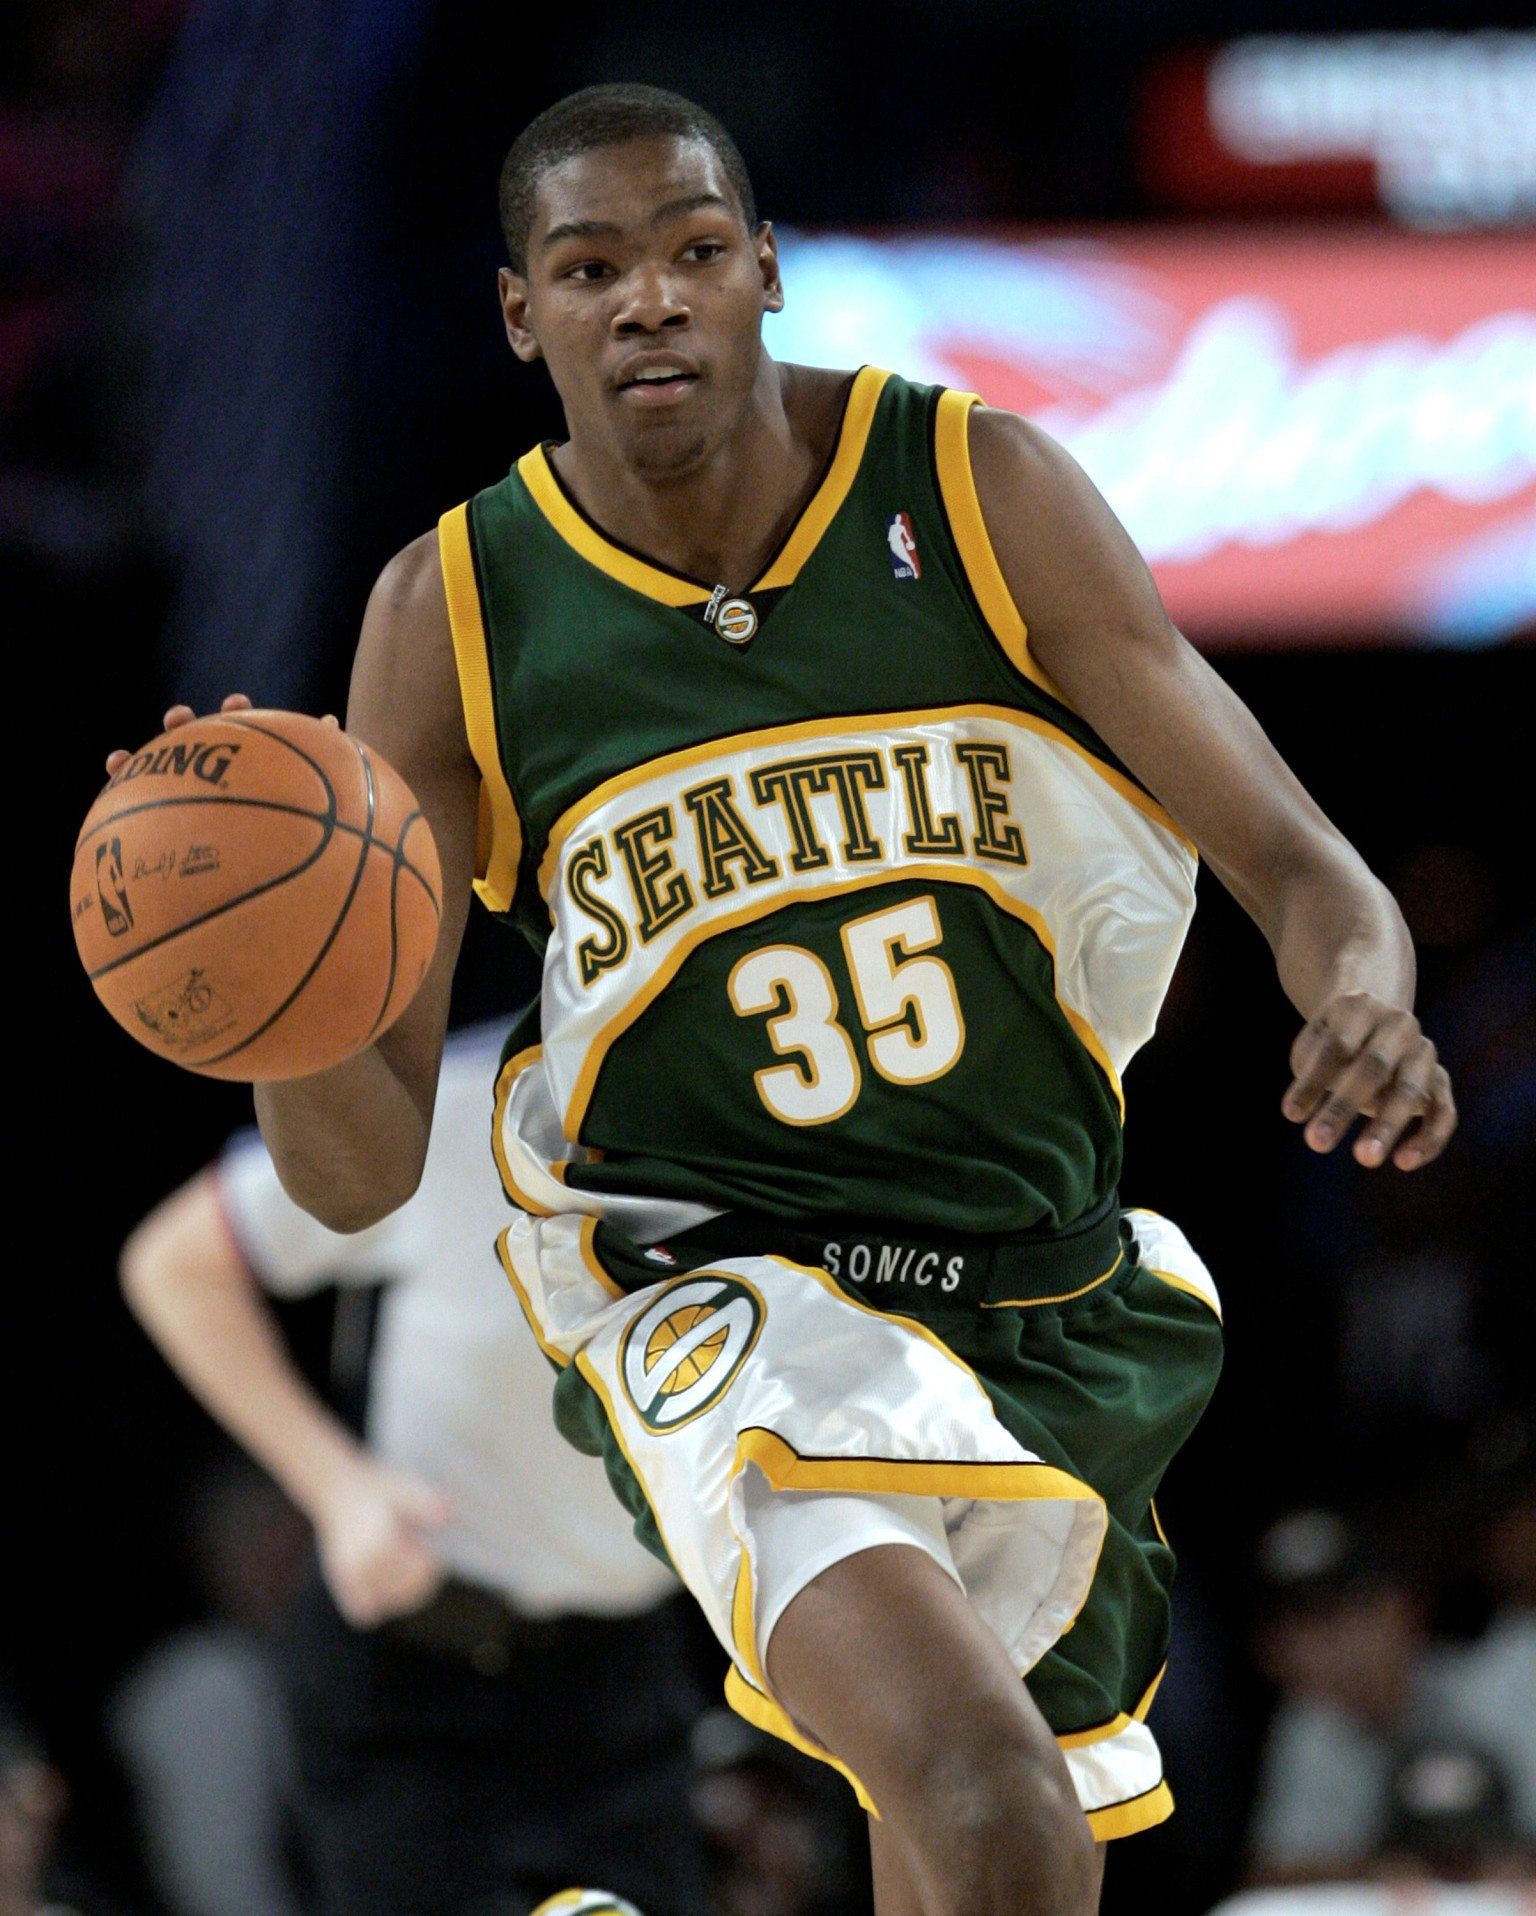 kevin durant seattle sonics jersey